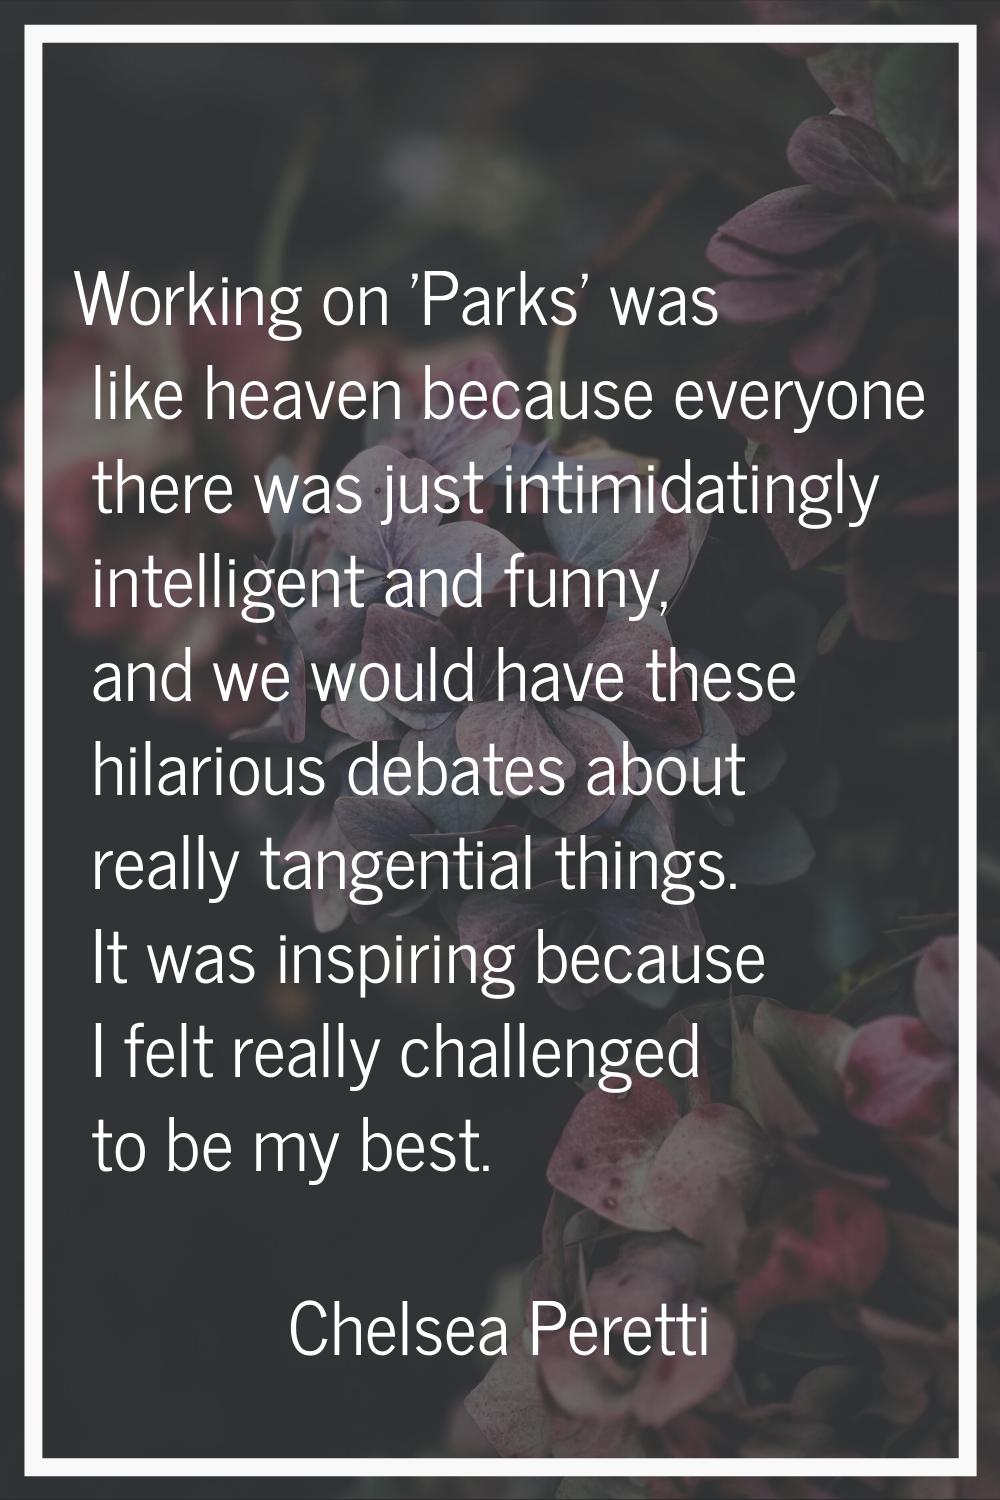 Working on 'Parks' was like heaven because everyone there was just intimidatingly intelligent and f